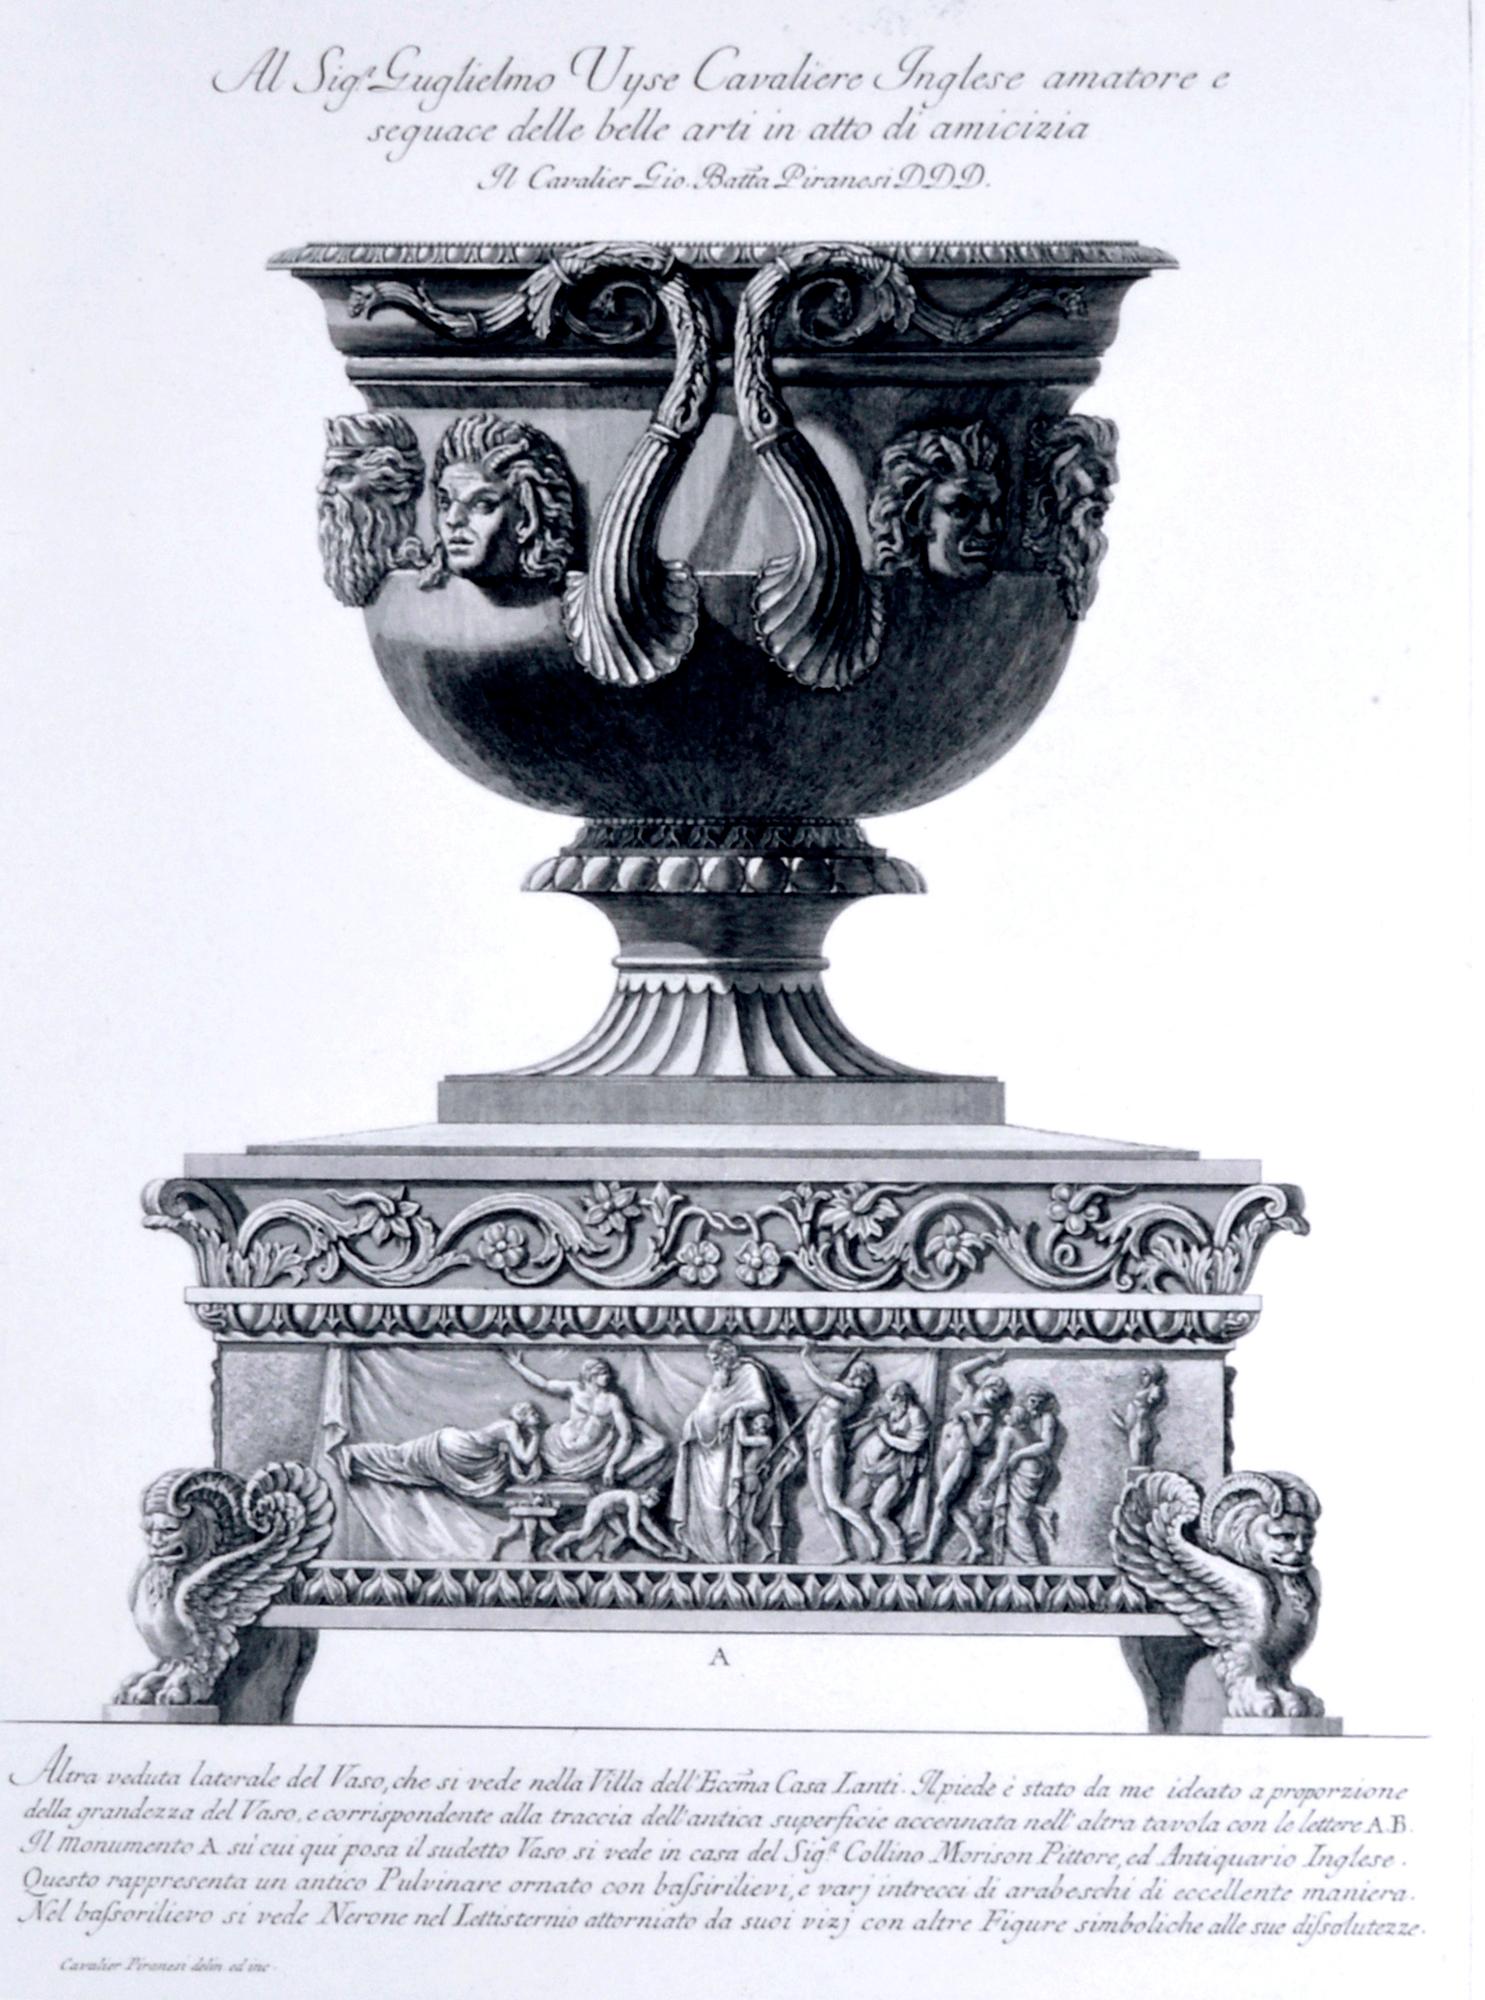 Framed Etching of a Massive Urn by Piranesi, Plate 549 For Sale 1